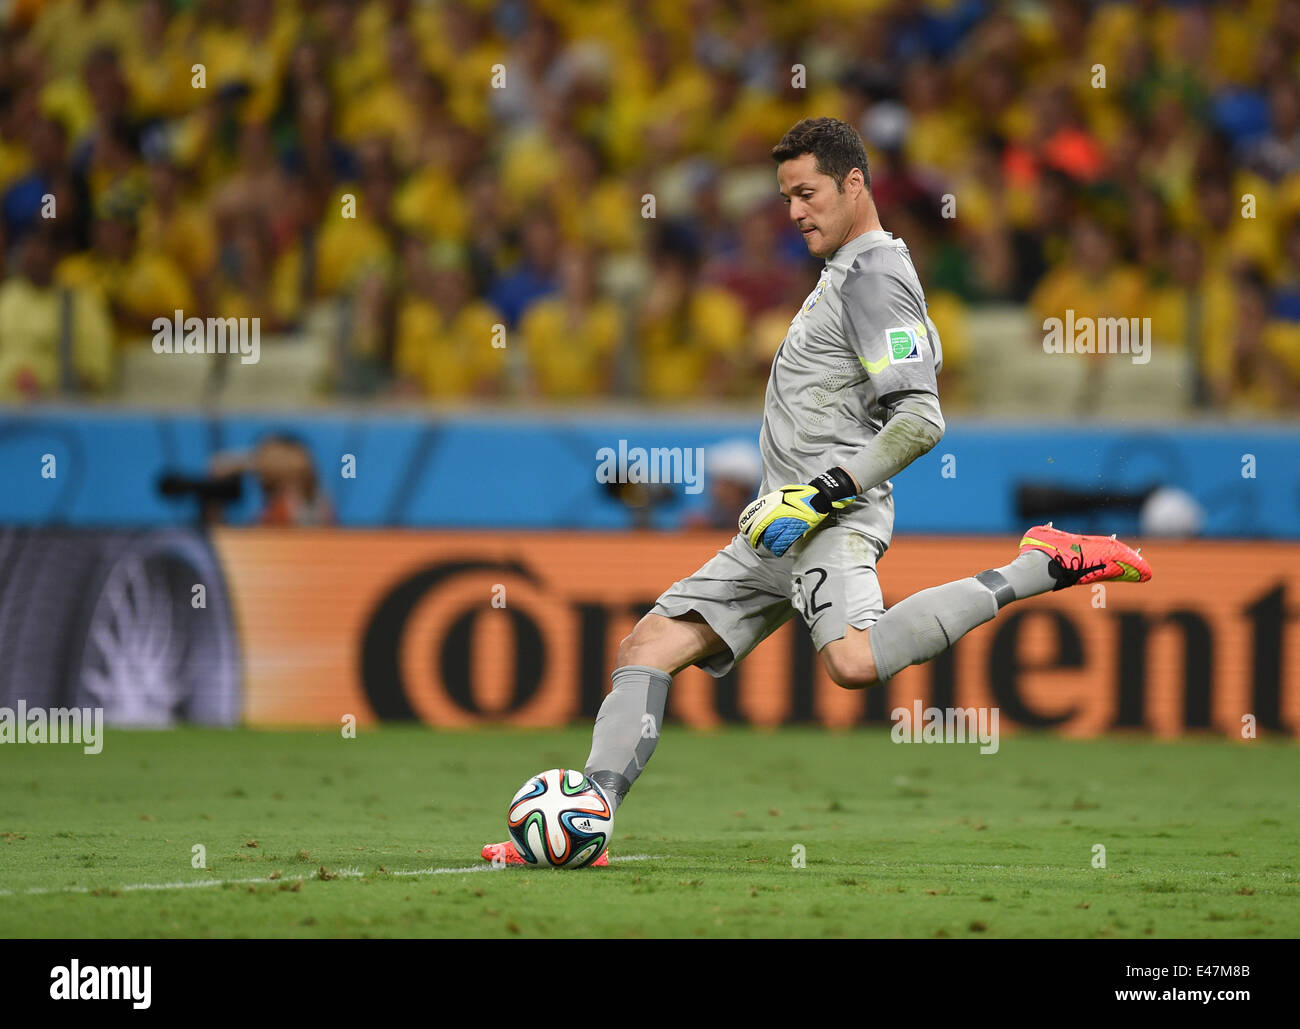 Fortaleza, Brazil. 04th July, 2014. Goalkeeper Julio Cesar of Brazil in action during the FIFA World Cup 2014 quarter final match soccer between Brazil and Colombia at the Estadio Castelao in Fortaleza, Brazil, 04 July 2014. Photo: Marius Becker/dpa/Alamy Live News Stock Photo